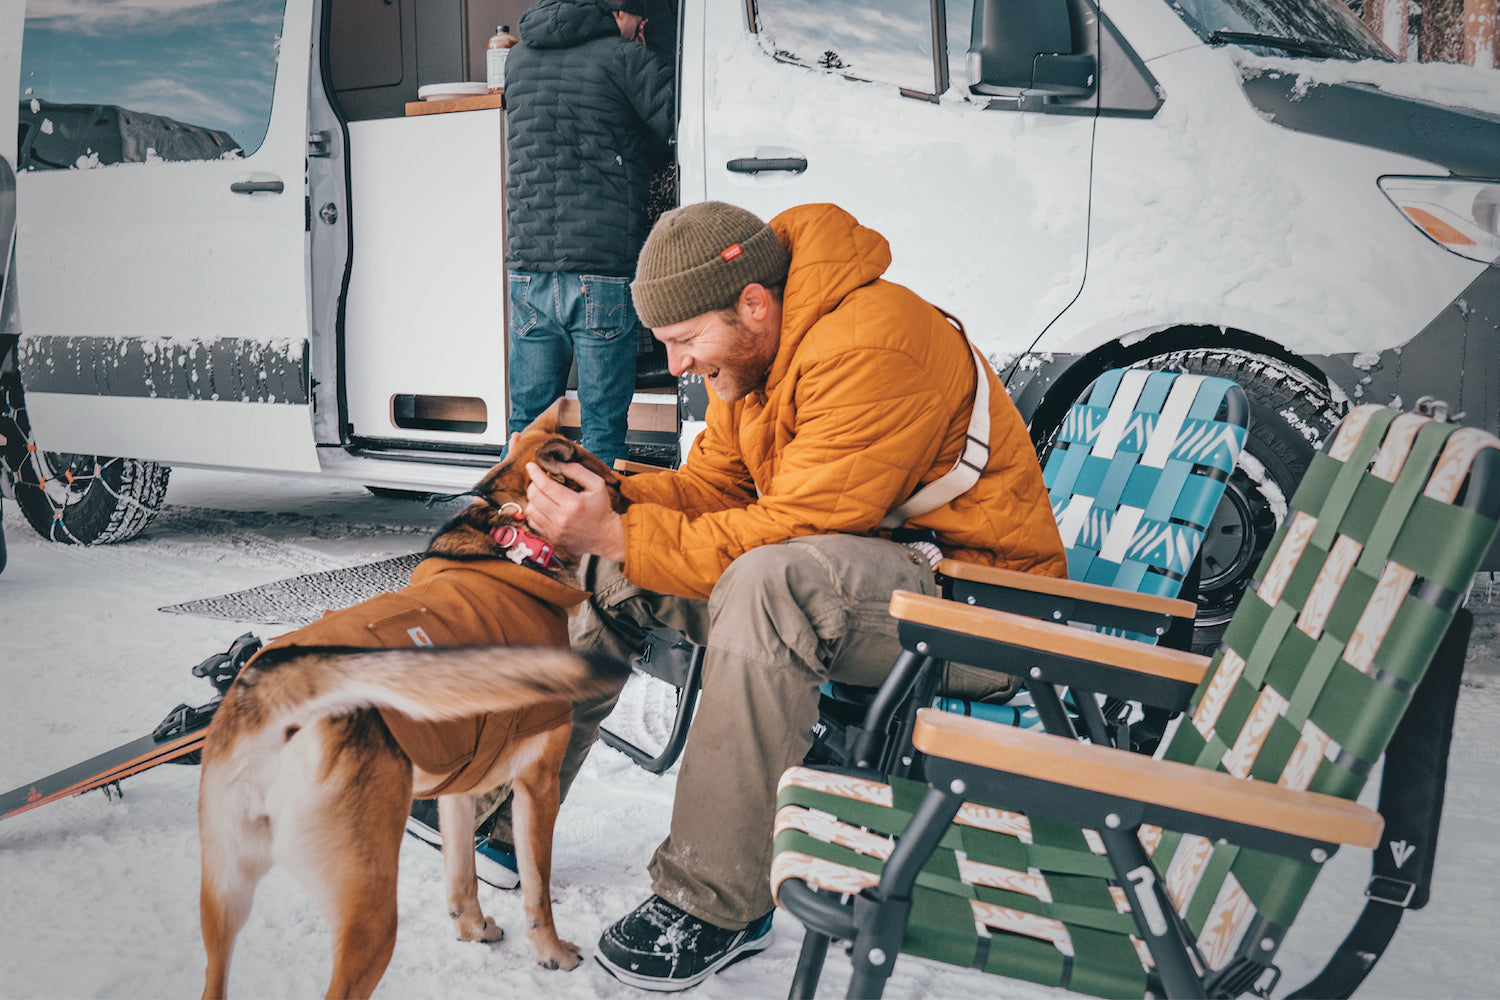 A man and his dog sitting infront of their merceded sprinter van in their PARKIT voyager outdoor chairs in the parking lot at stump ally on mammoth mountain.